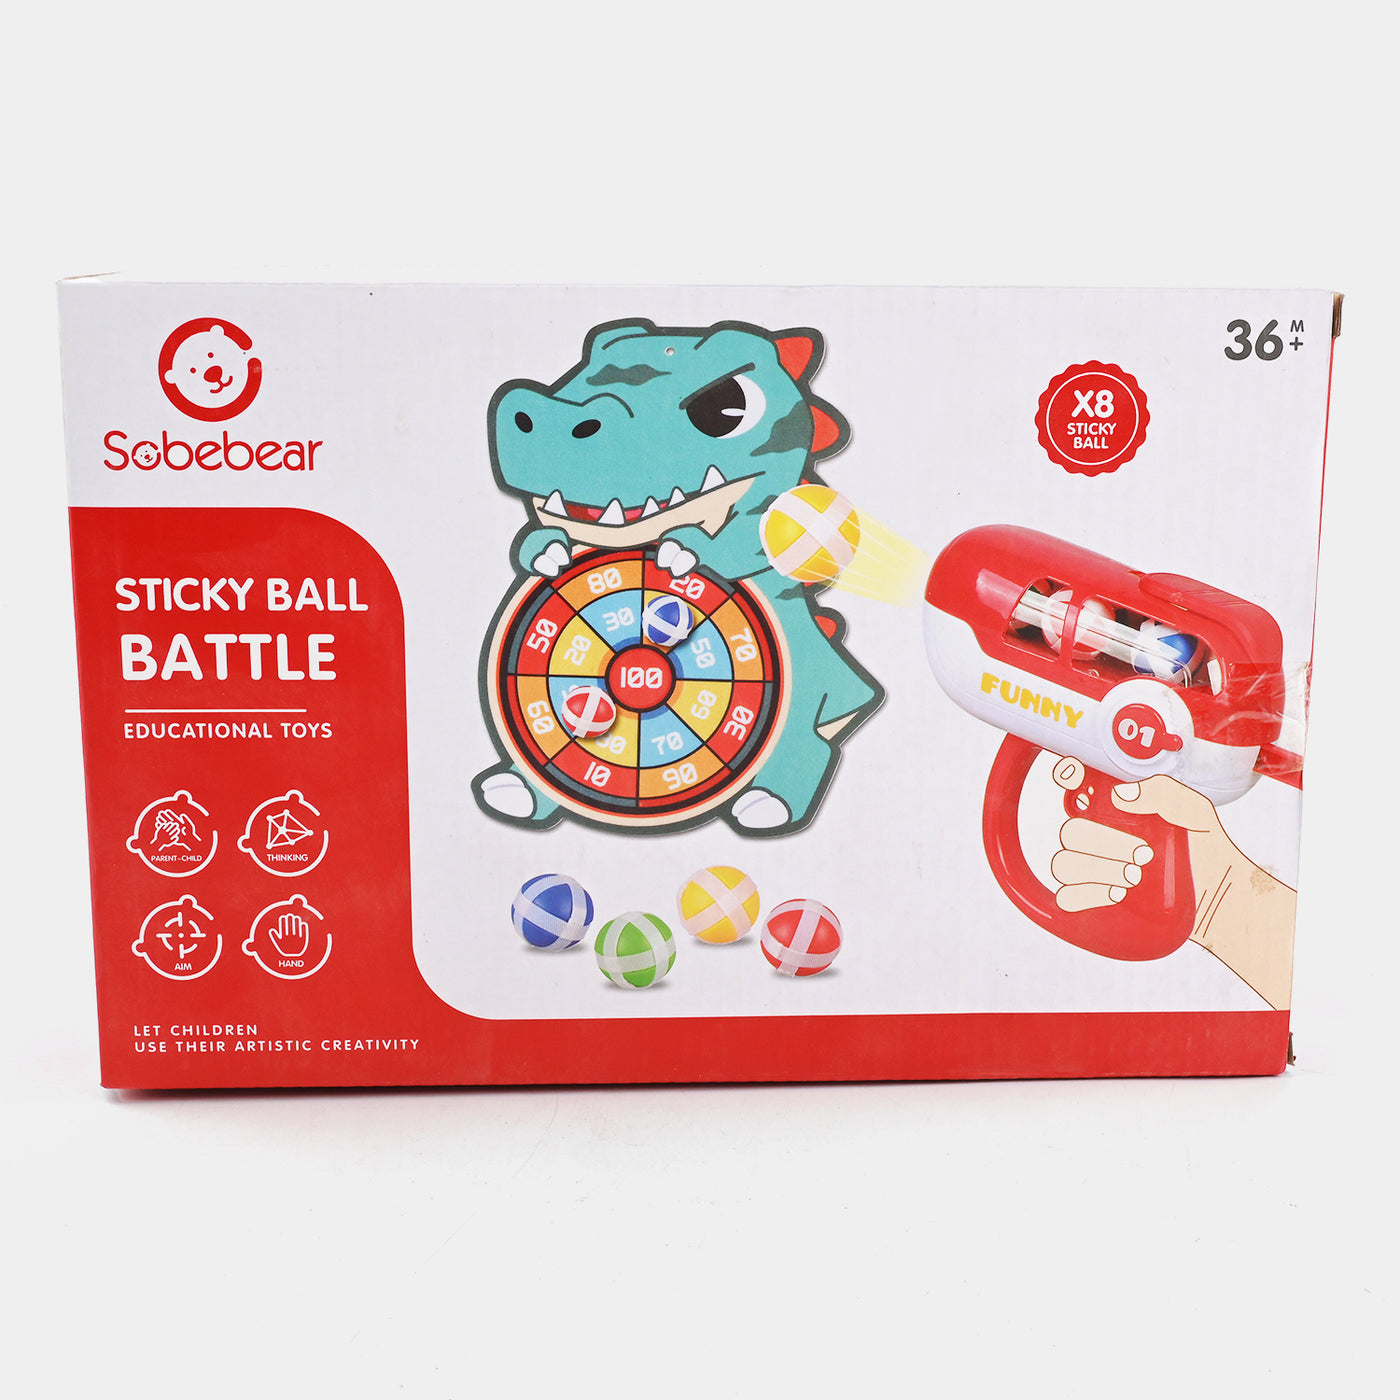 Dinosaur Target With Sticky Ball For Kids